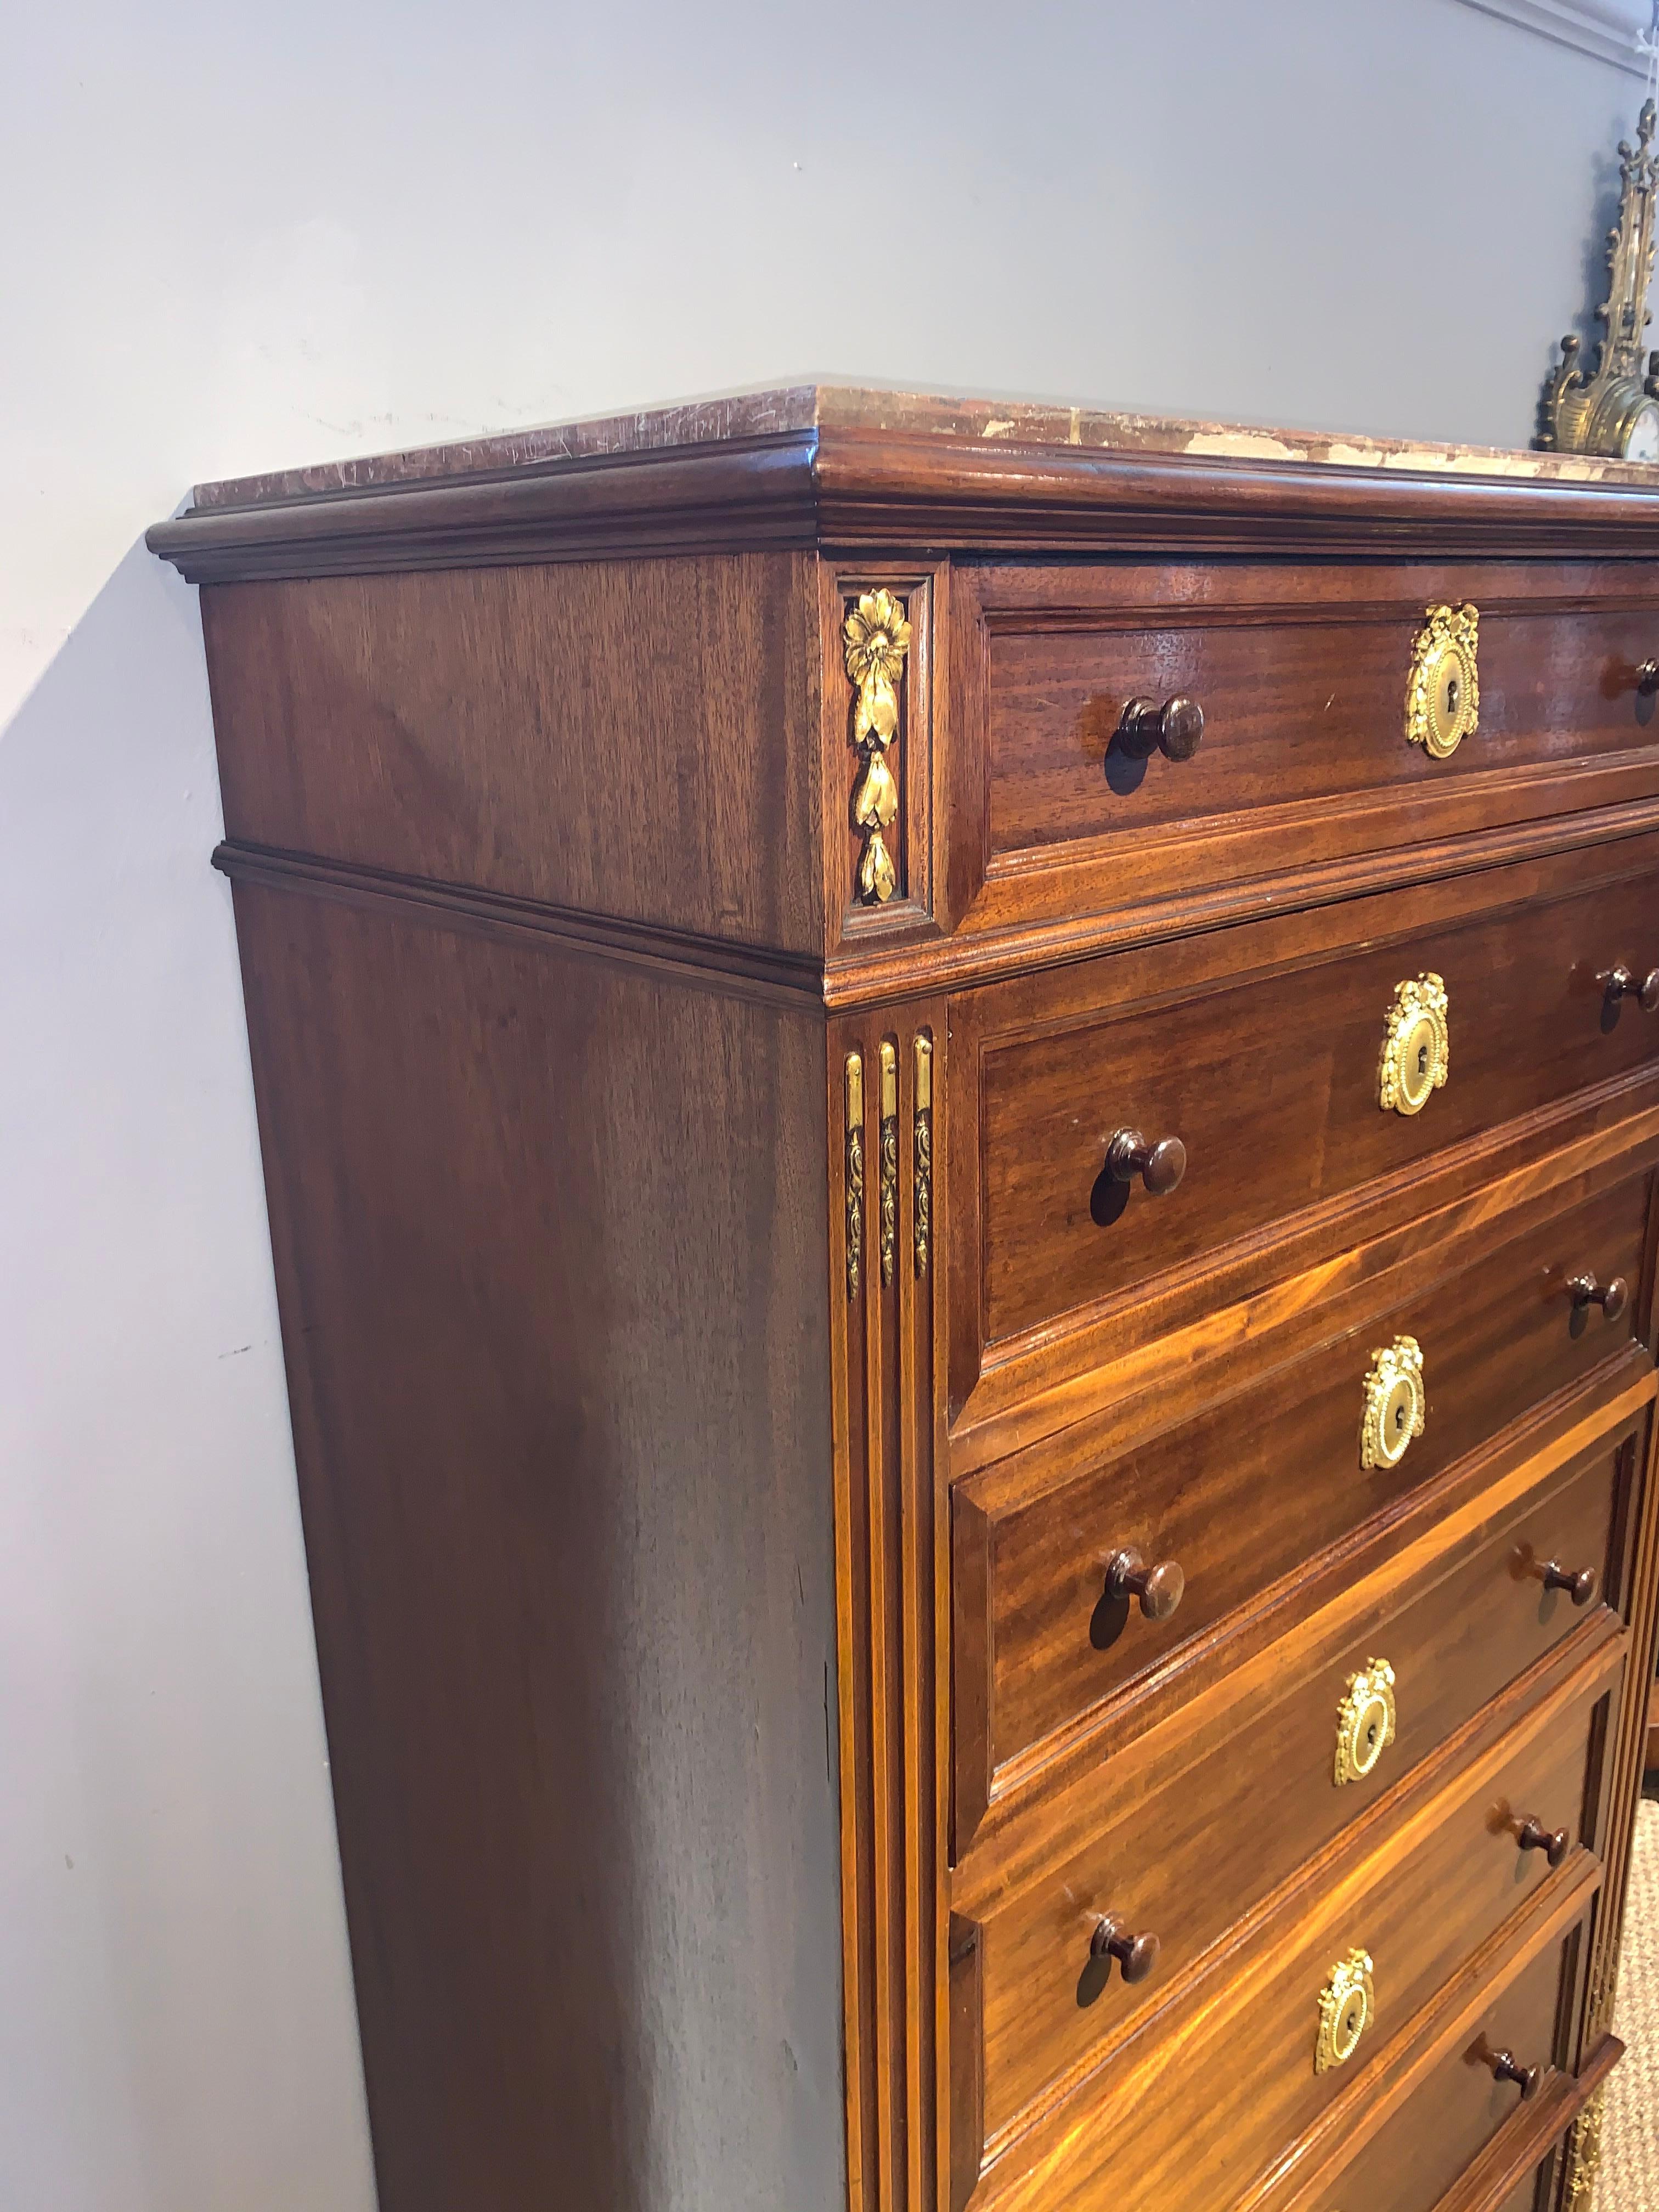 Great early 20th century tall narrow chest of 7 drawers, known as a semainier, drawer for each day of the week

This piece is made of solid walnut with original ormolu mounts, supplied with working locks and a key, rouge marble top 

Having been